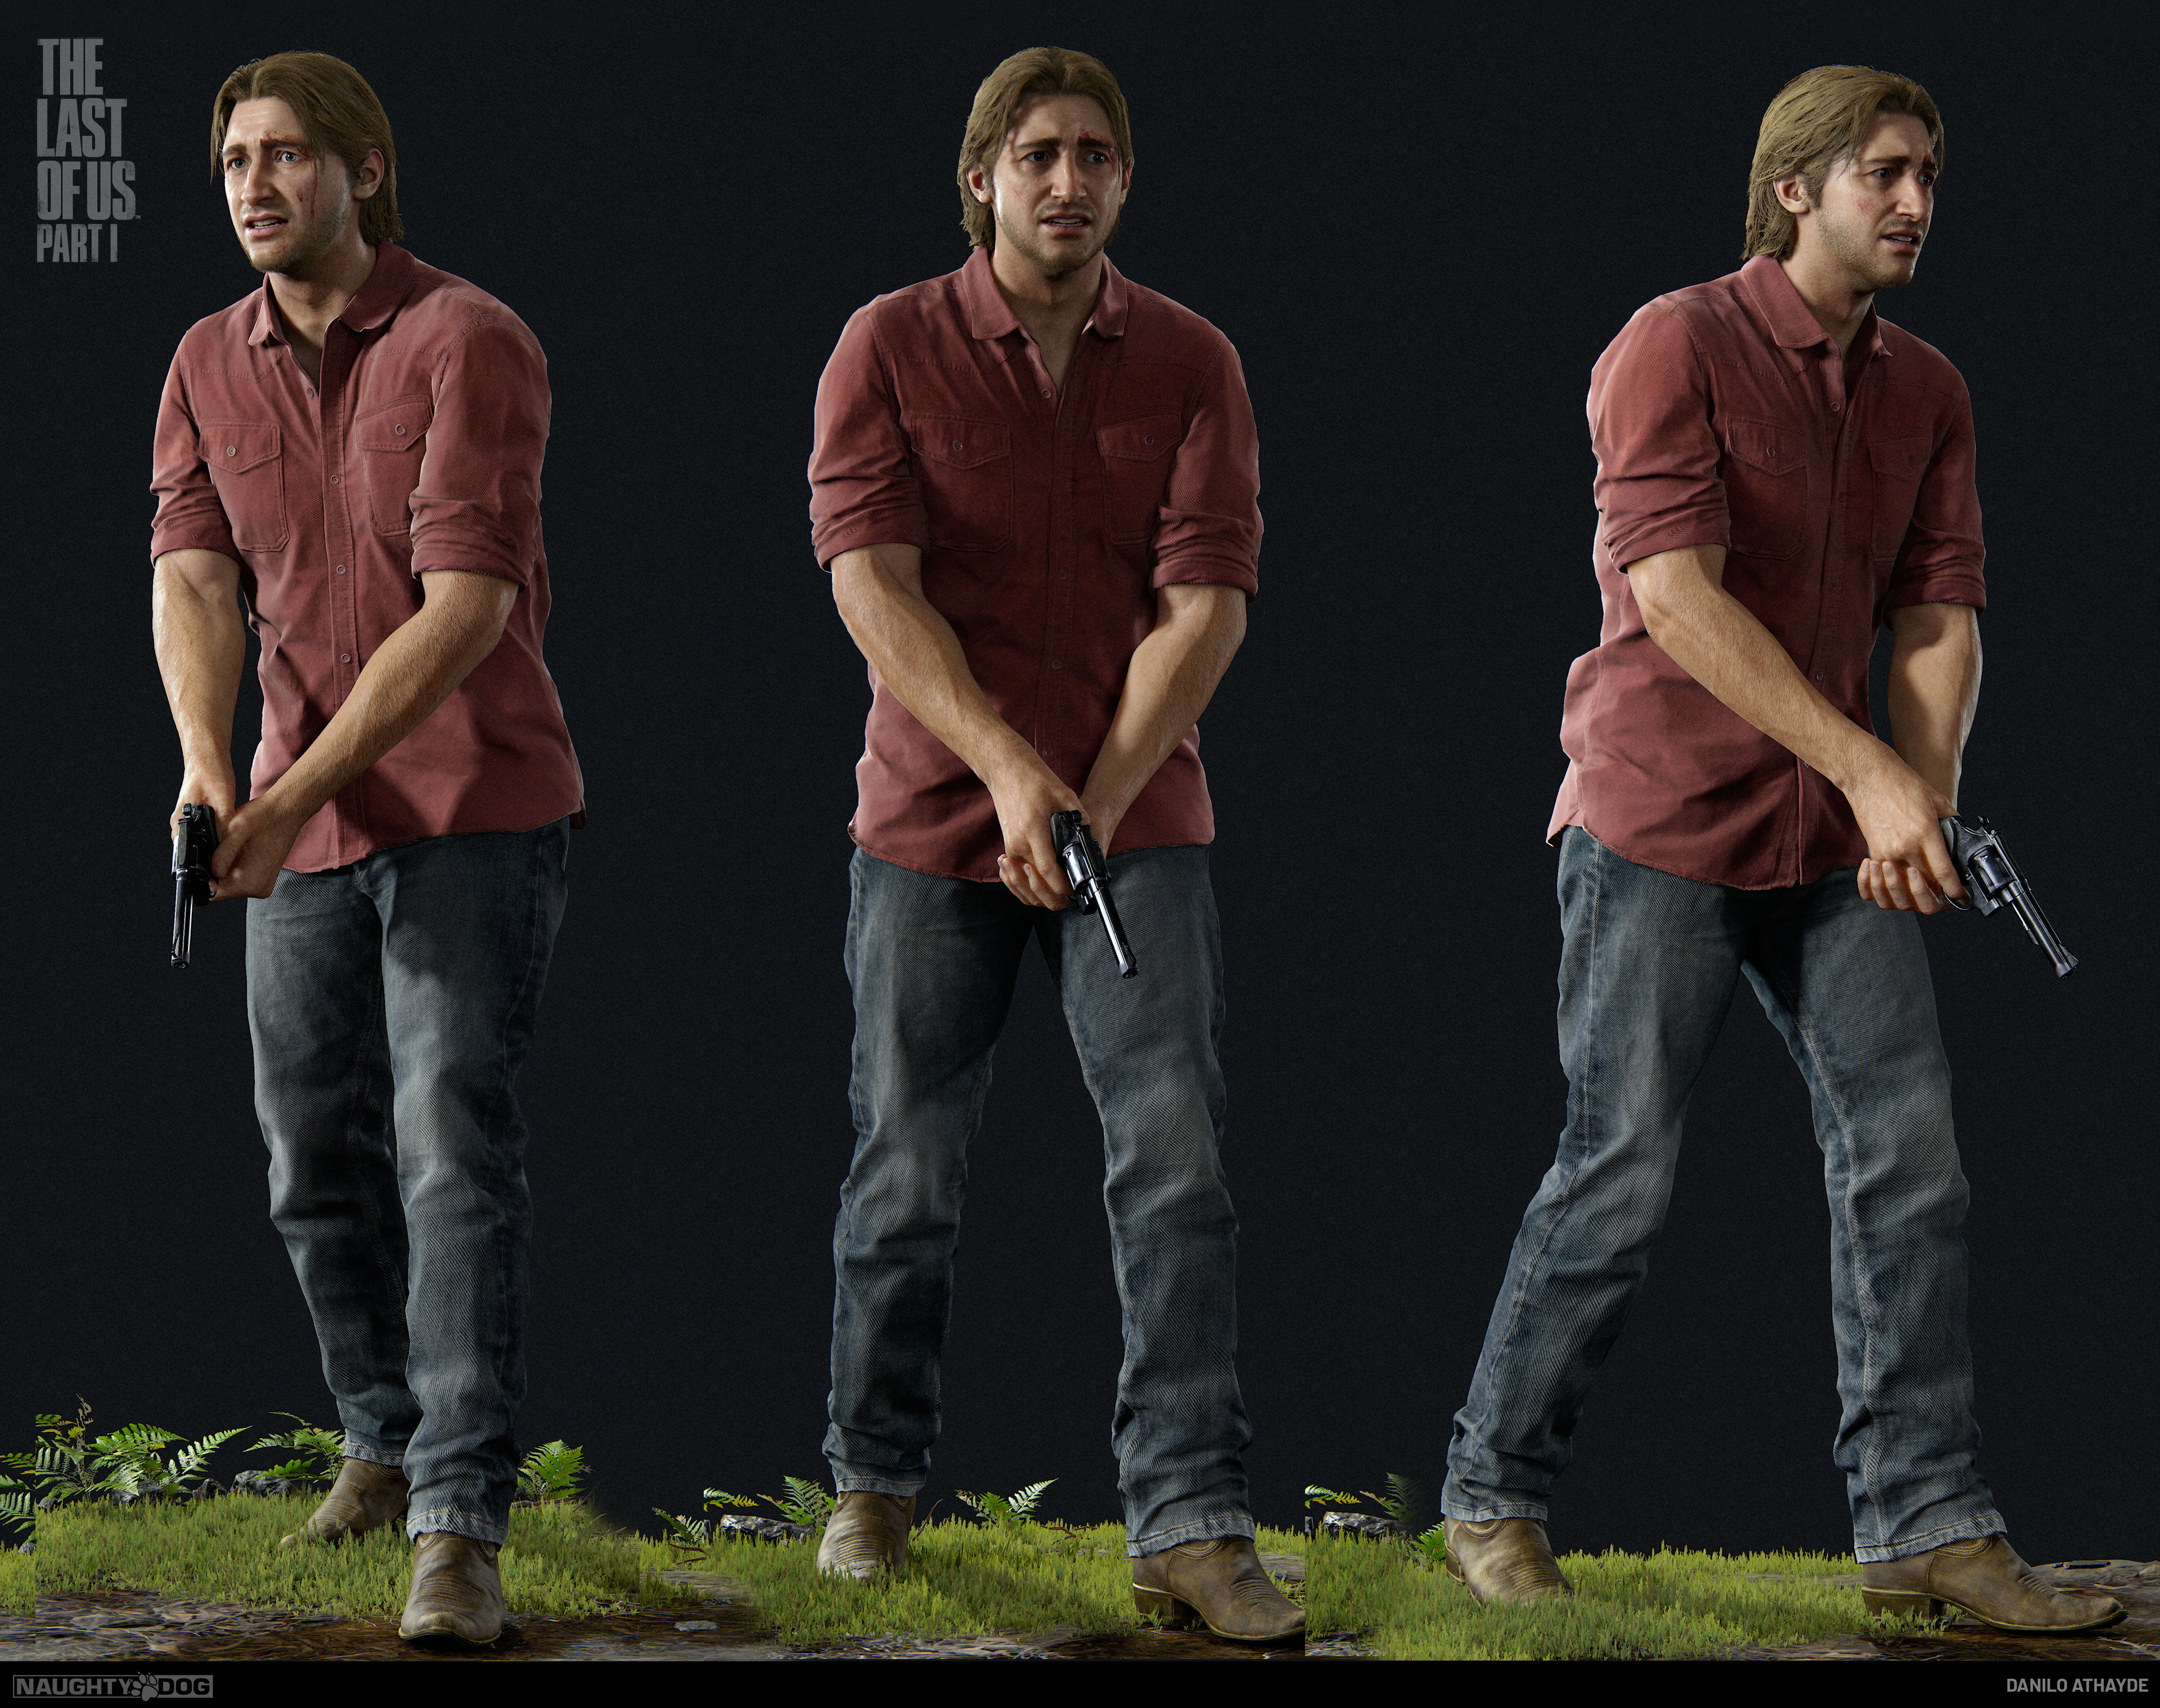 ArtStation - Tommy, Danilo Athayde  The last of us, The lest of us, Game  costumes